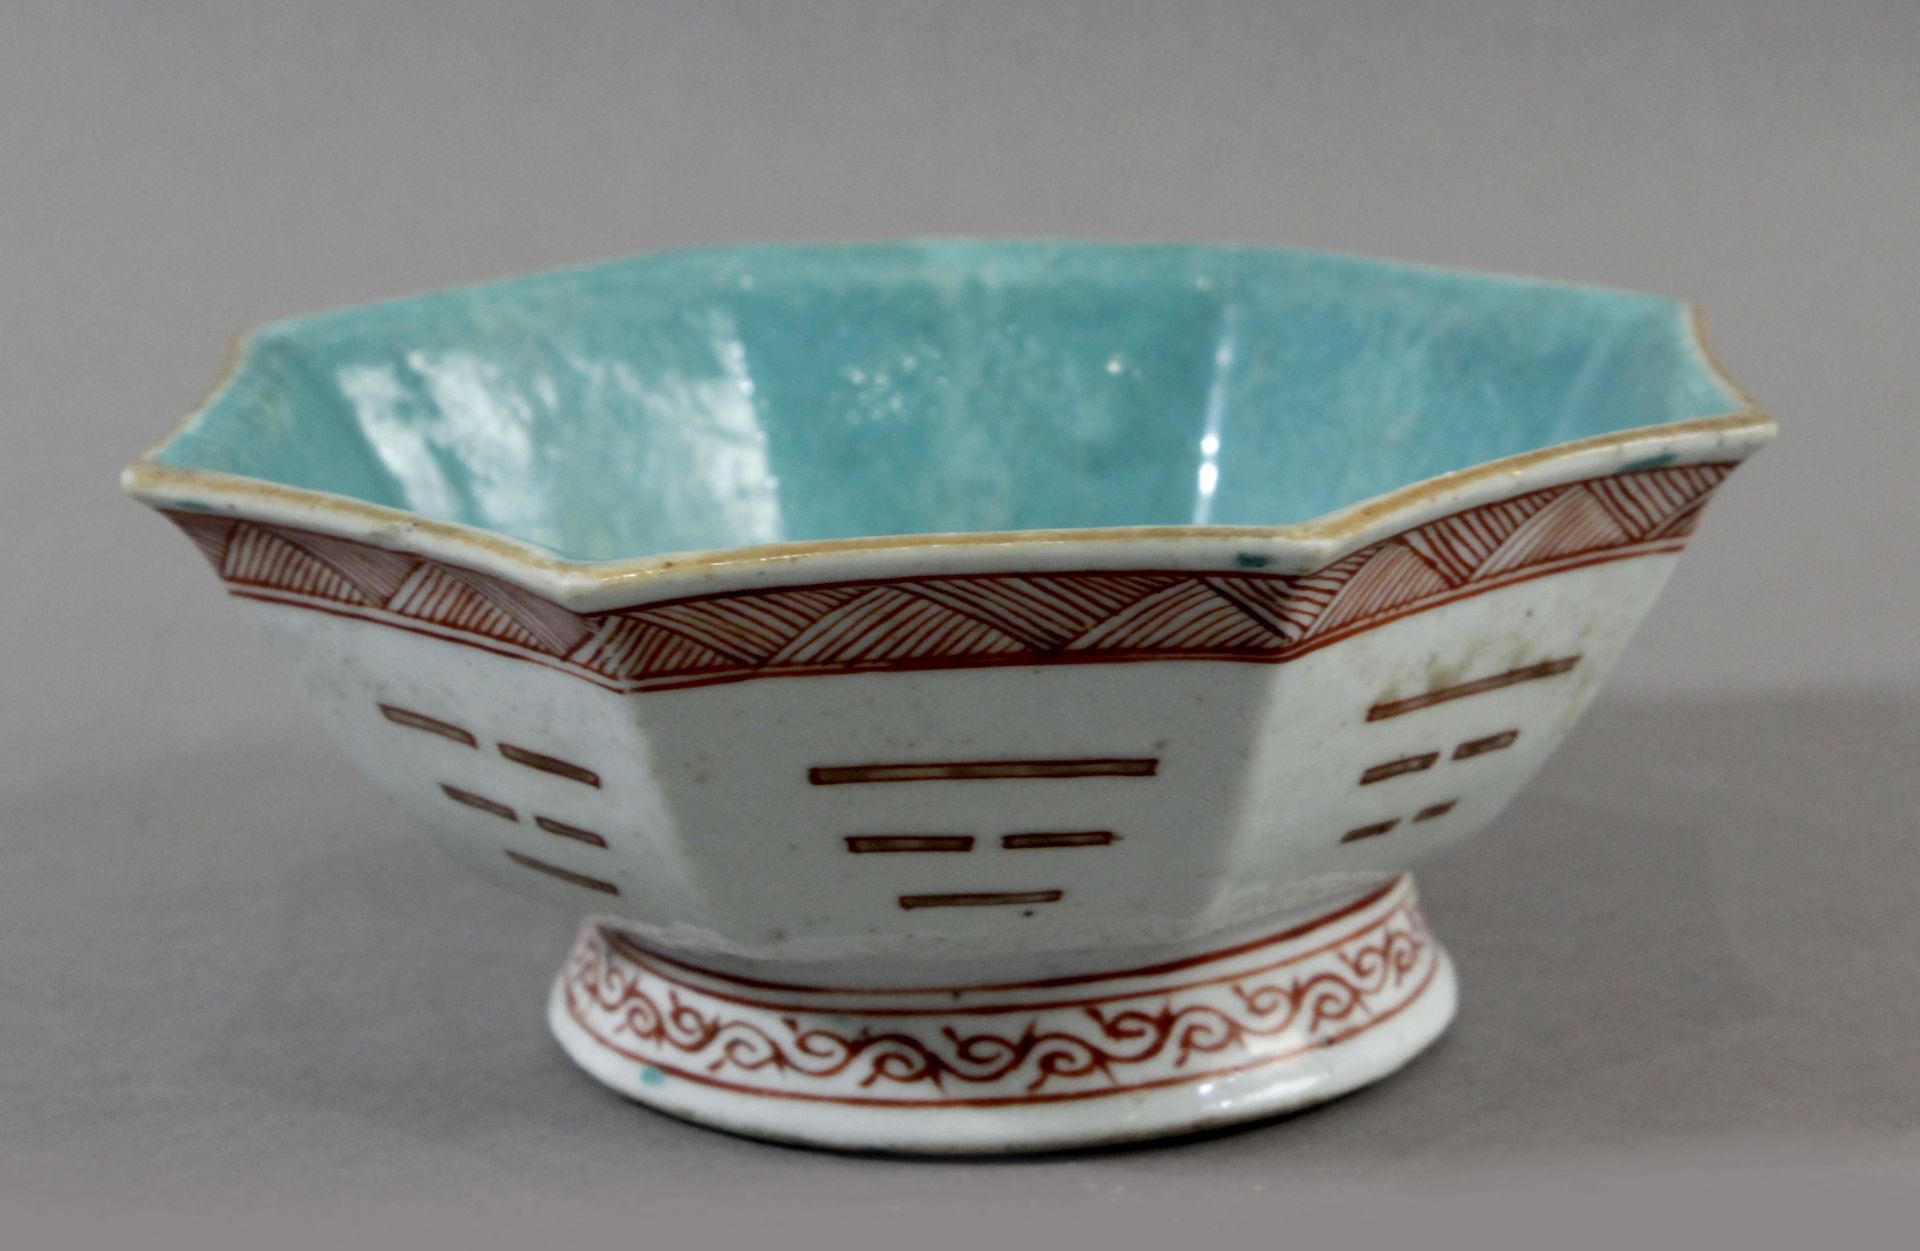 A late 19th century Chinese fruit bowl in celadon porcelain from Qing dynasty period